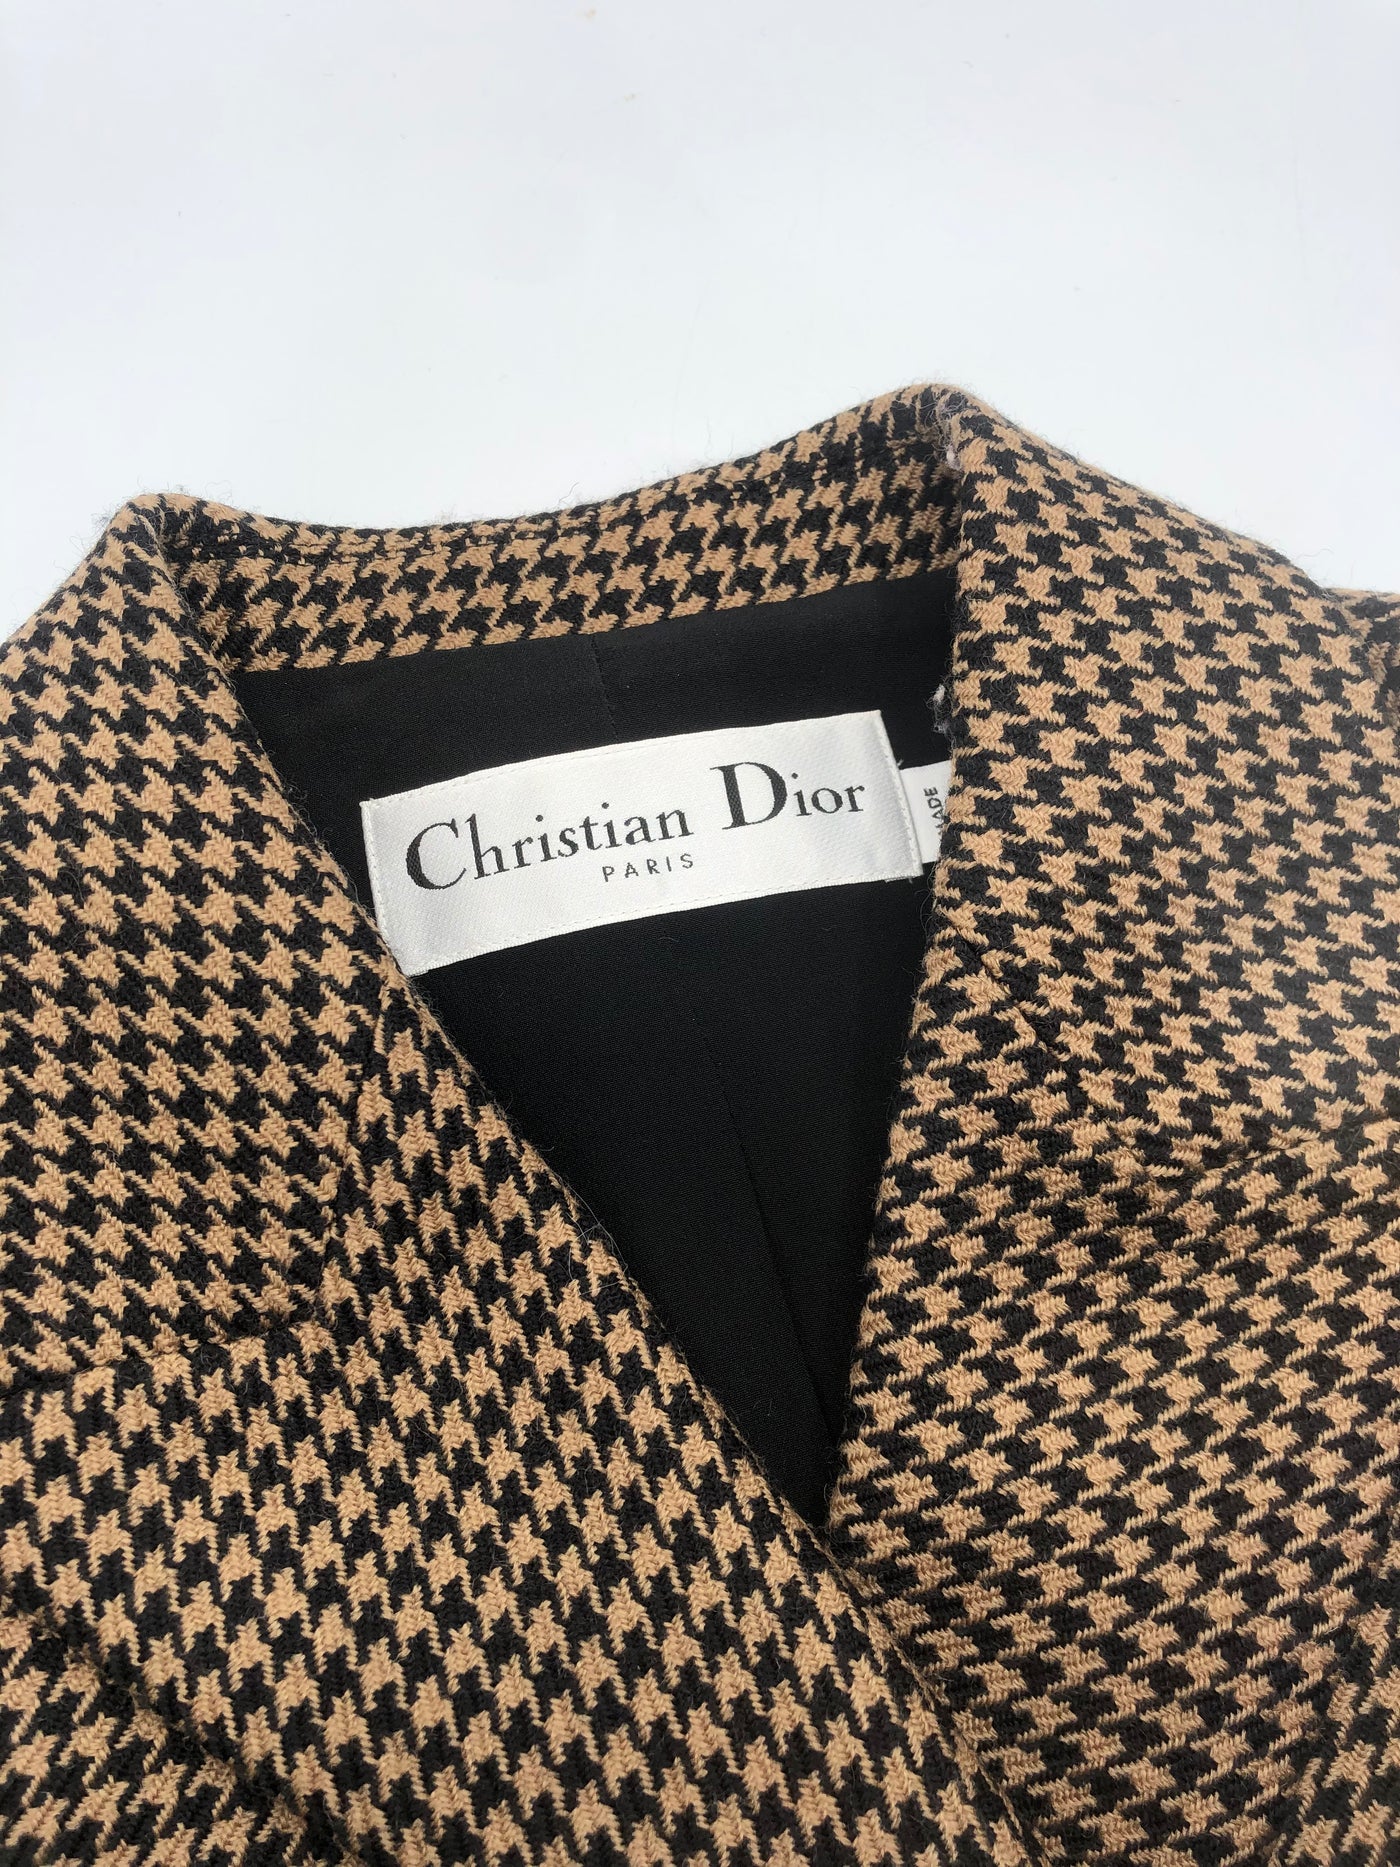 CHRISTIAN DIOR new T Bar Blazer jacket Double Breasted size 38 RRP: £3400